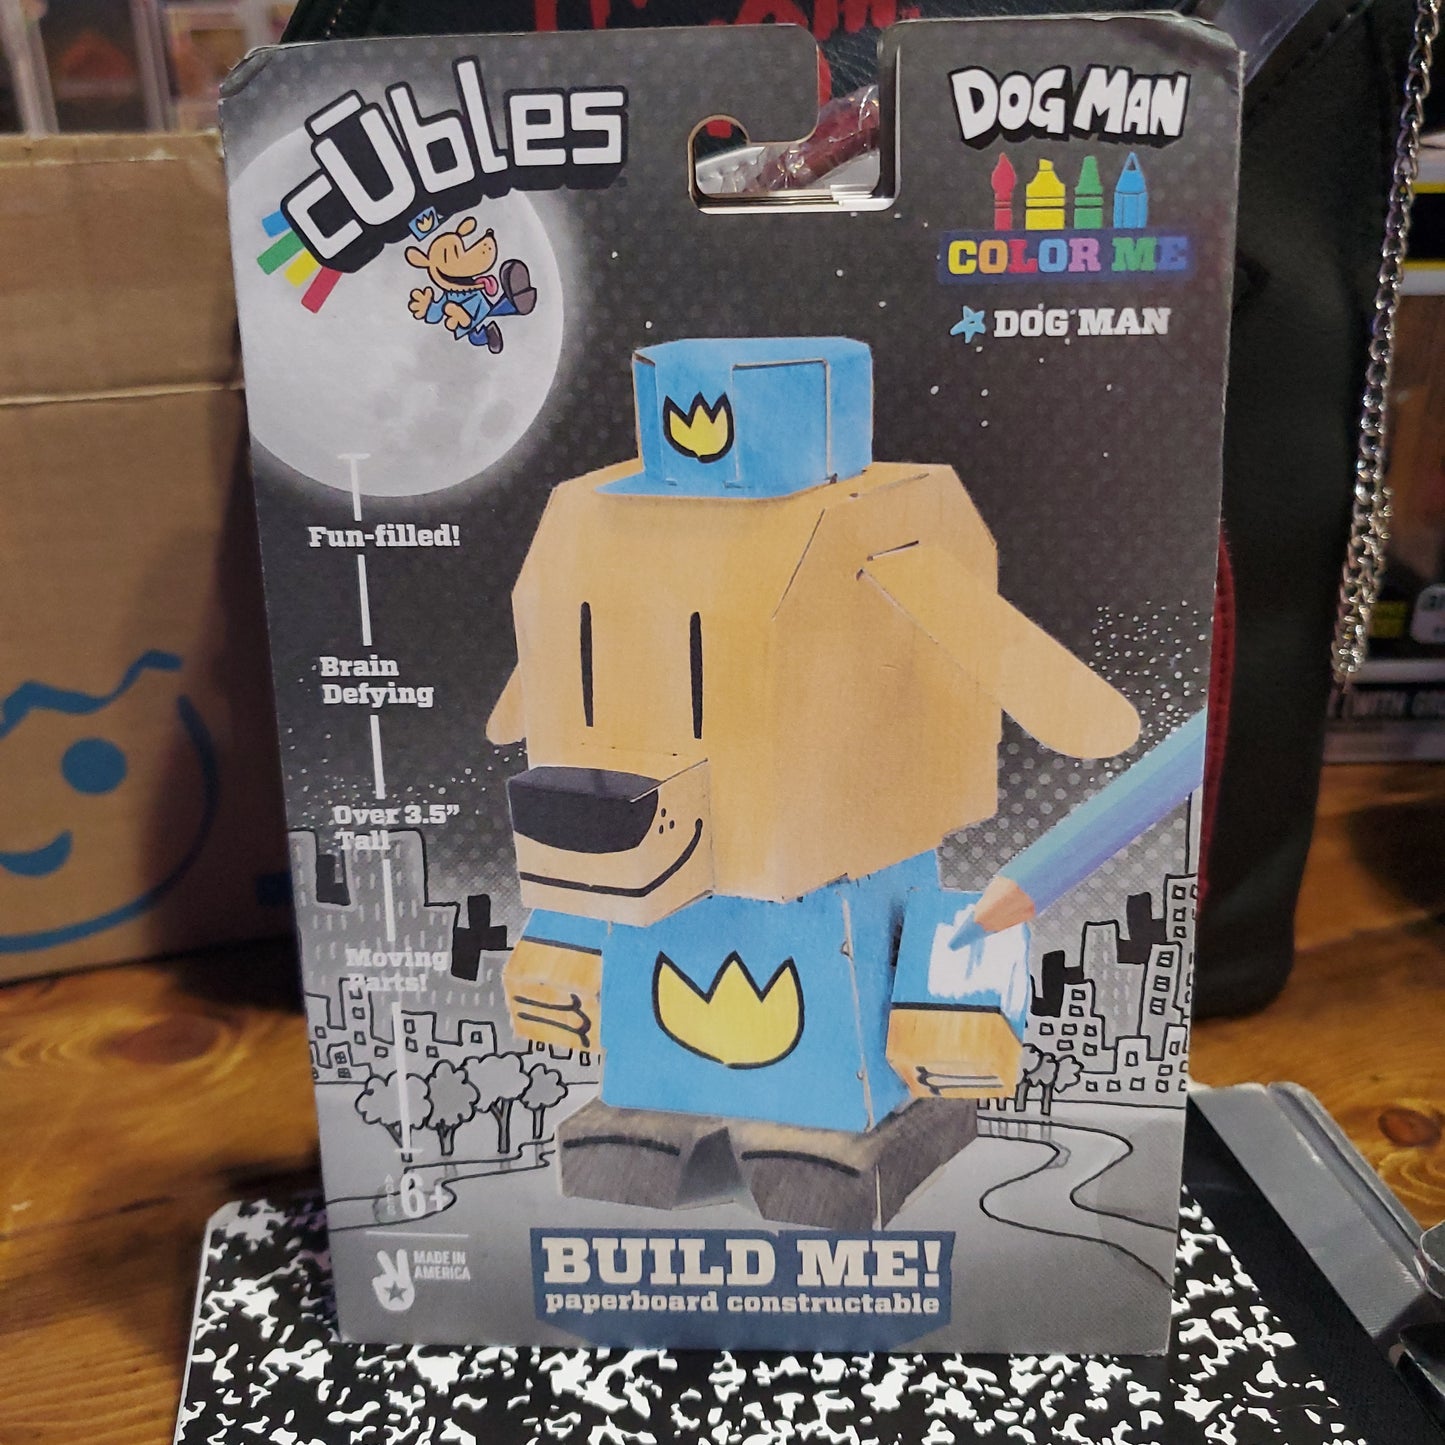 Dog Man by Dav Pilkey - Cubles Paperboard Constuctables